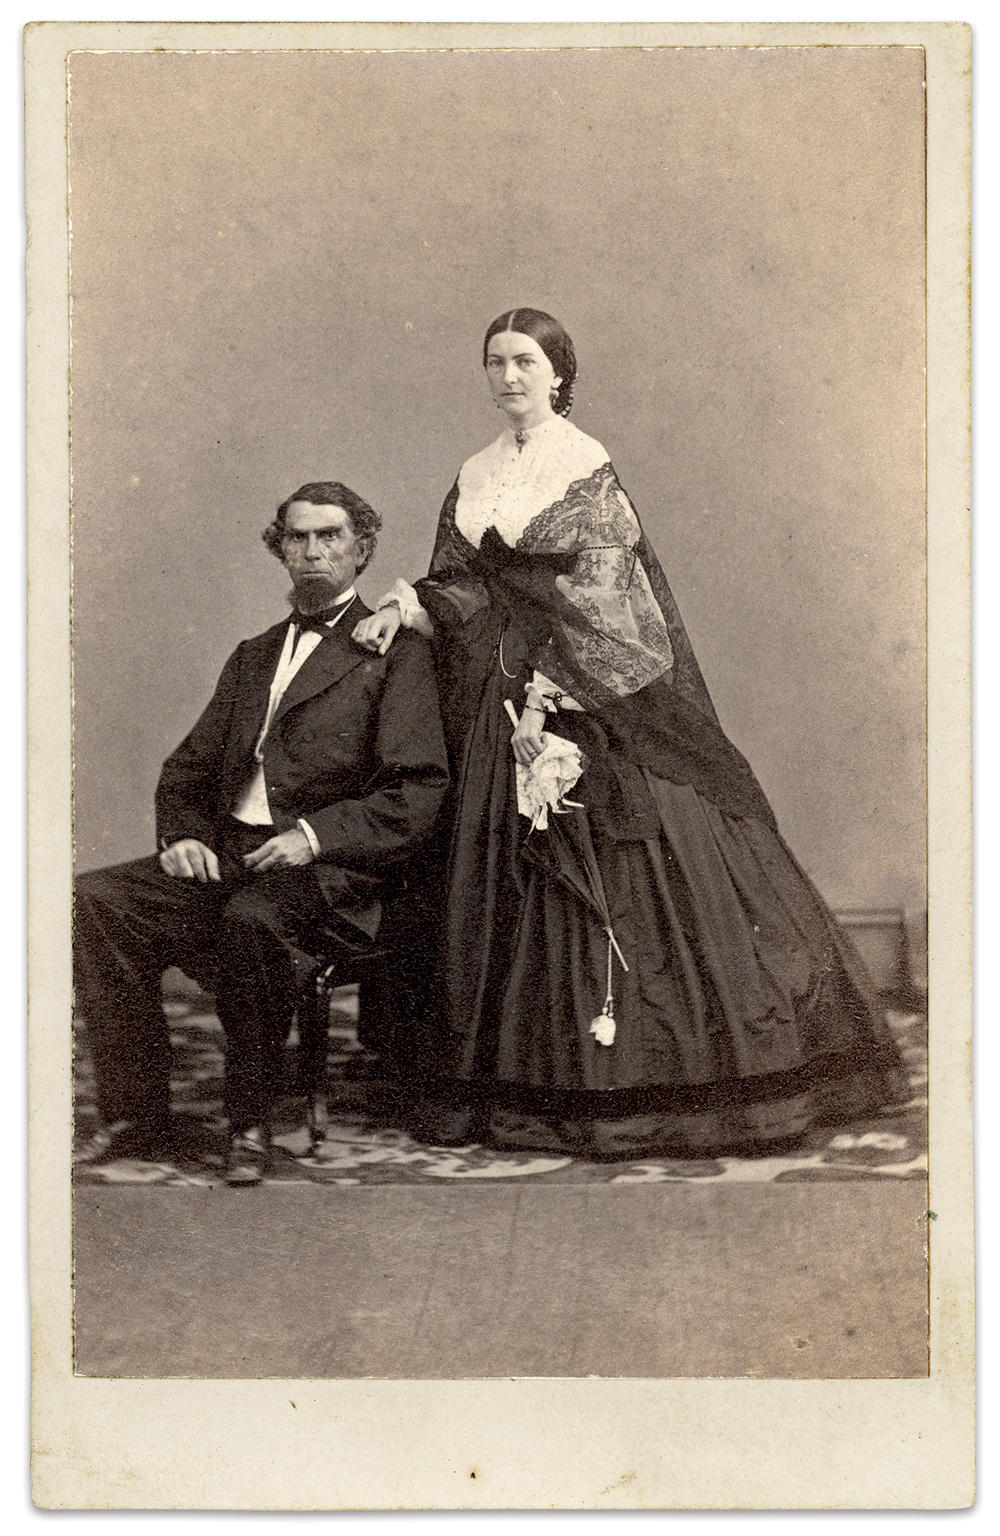 Kelley and his third wife, Mary, circa 1865. Carte de visite by Wenderoth, Taylor & Brown of Philadelphia Pa. Author’s collection.